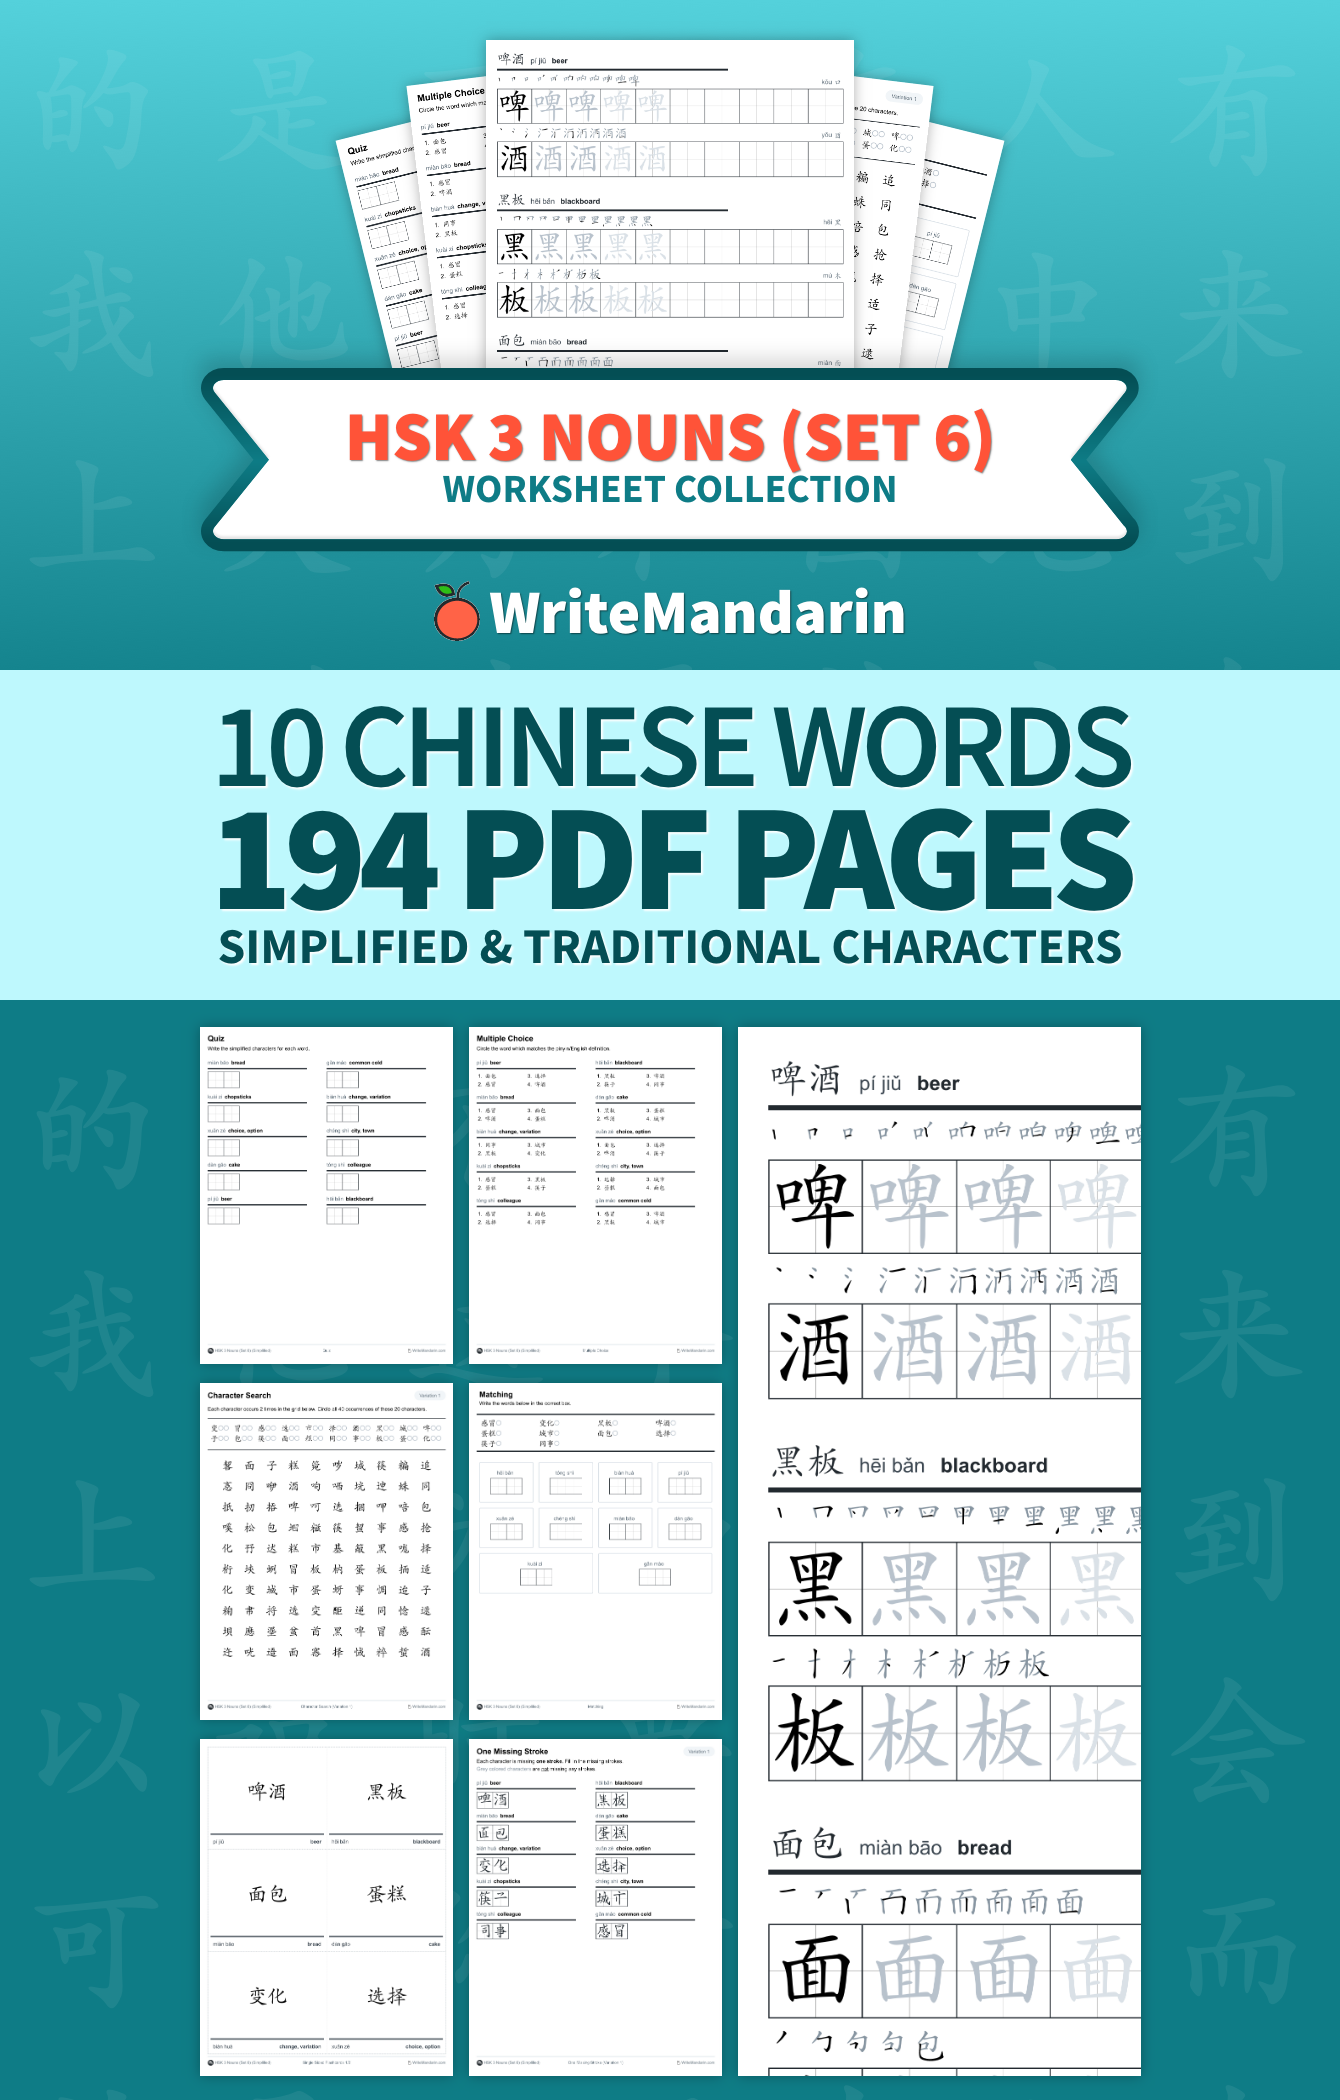 Preview image of HSK 3 Nouns (Set 6) worksheet collection